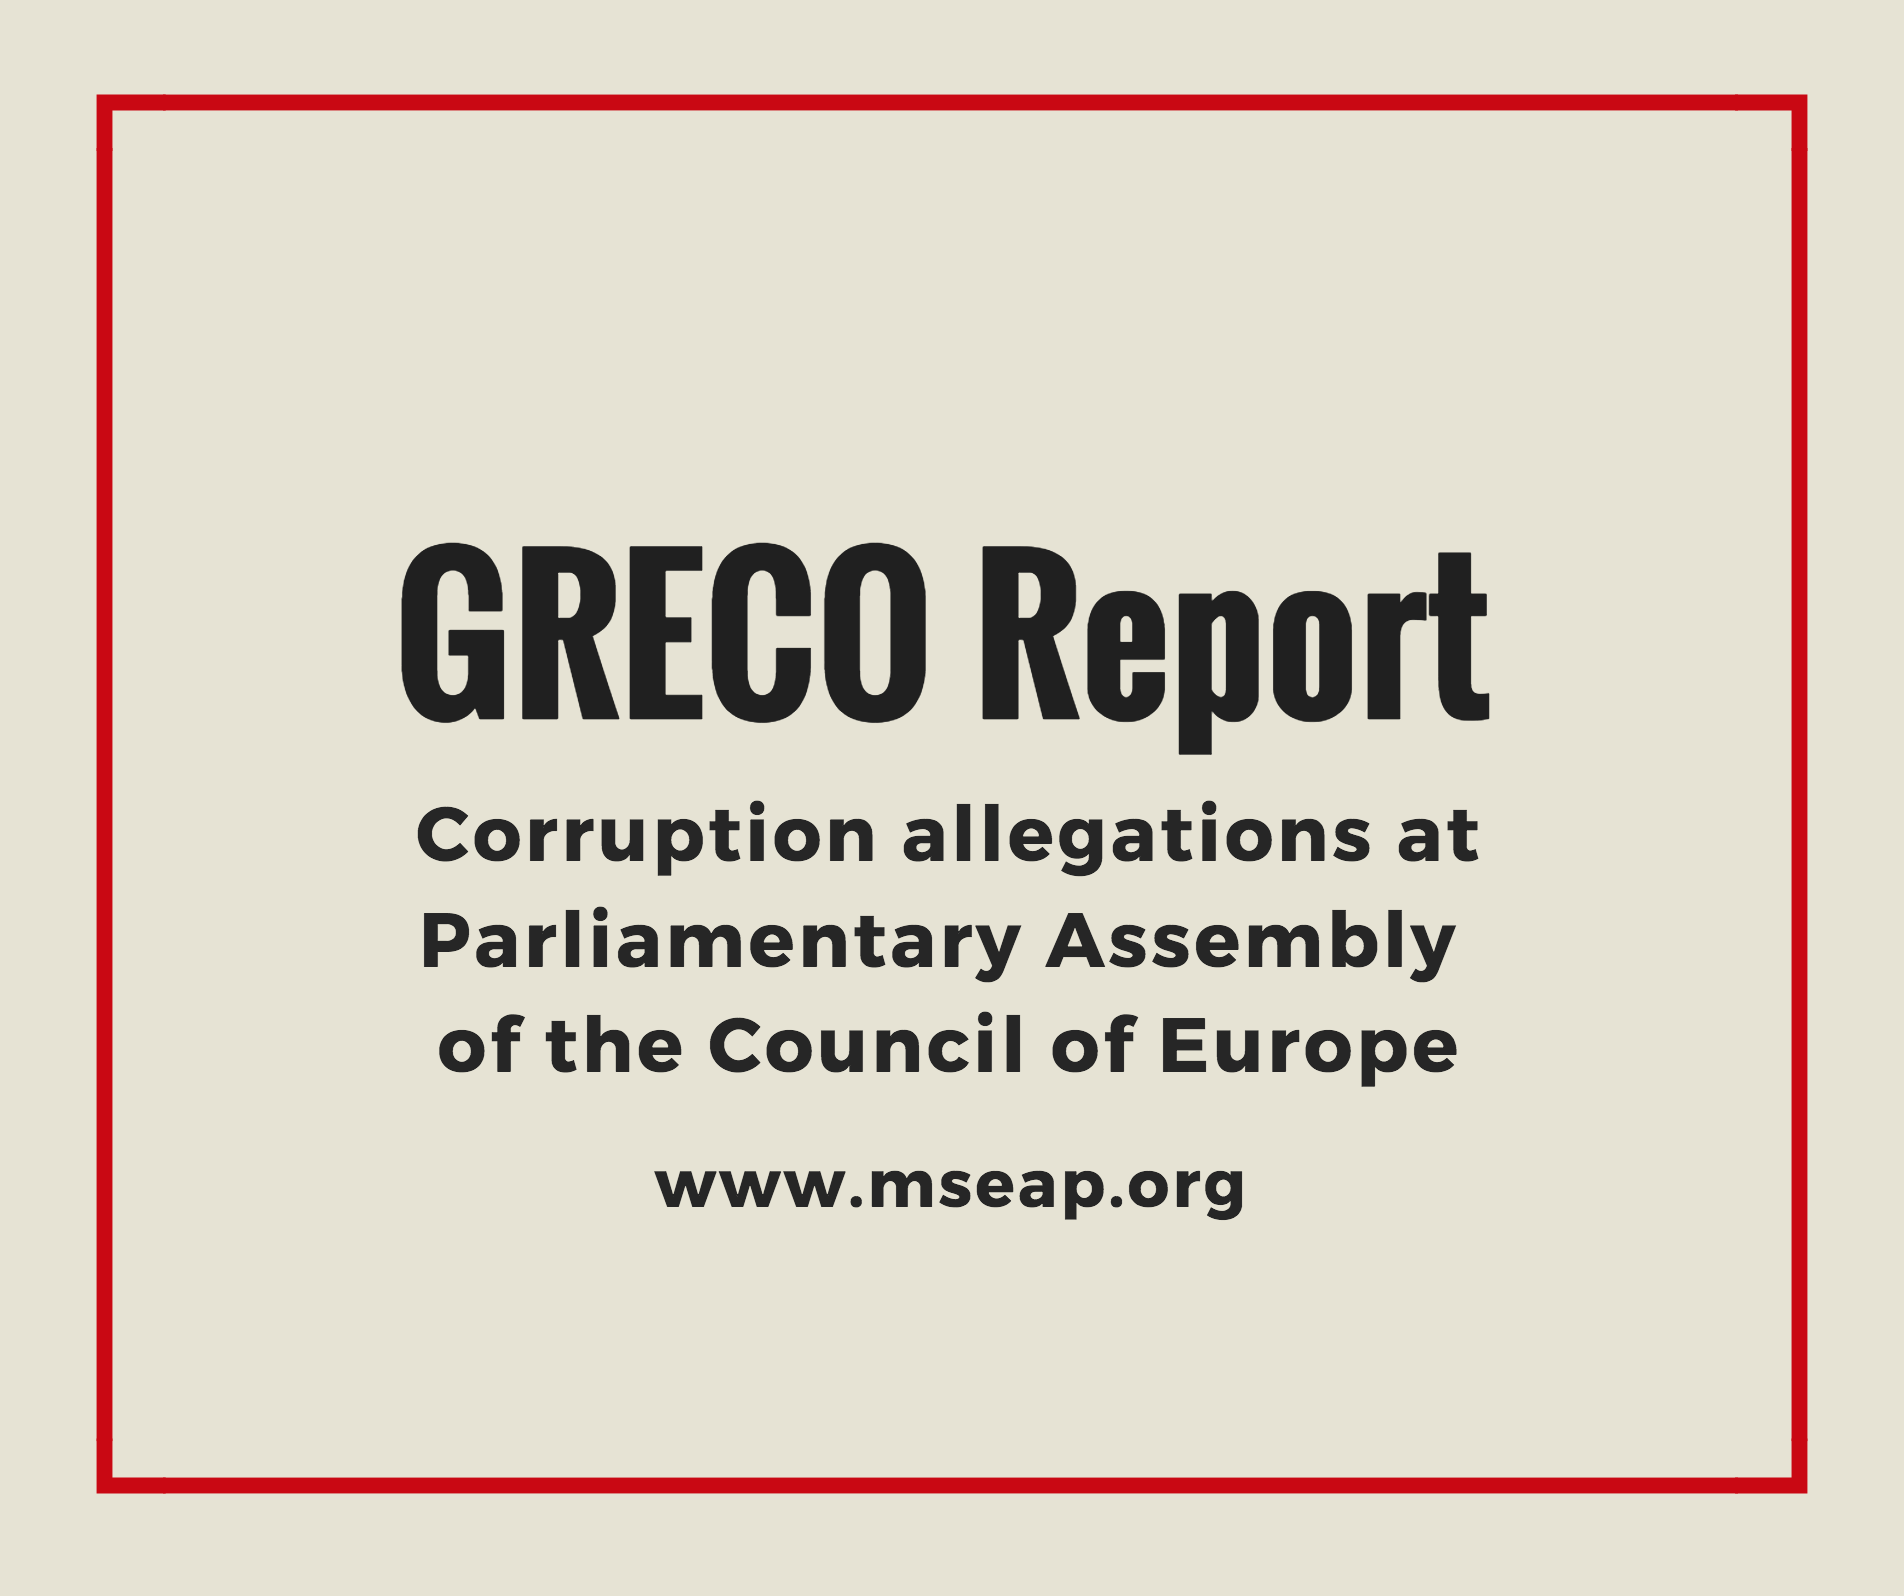 GRECO’s independent investigation report on corruption to be presented at a PACE session to examine hot potatoes ranging from the corruption to state of emergency